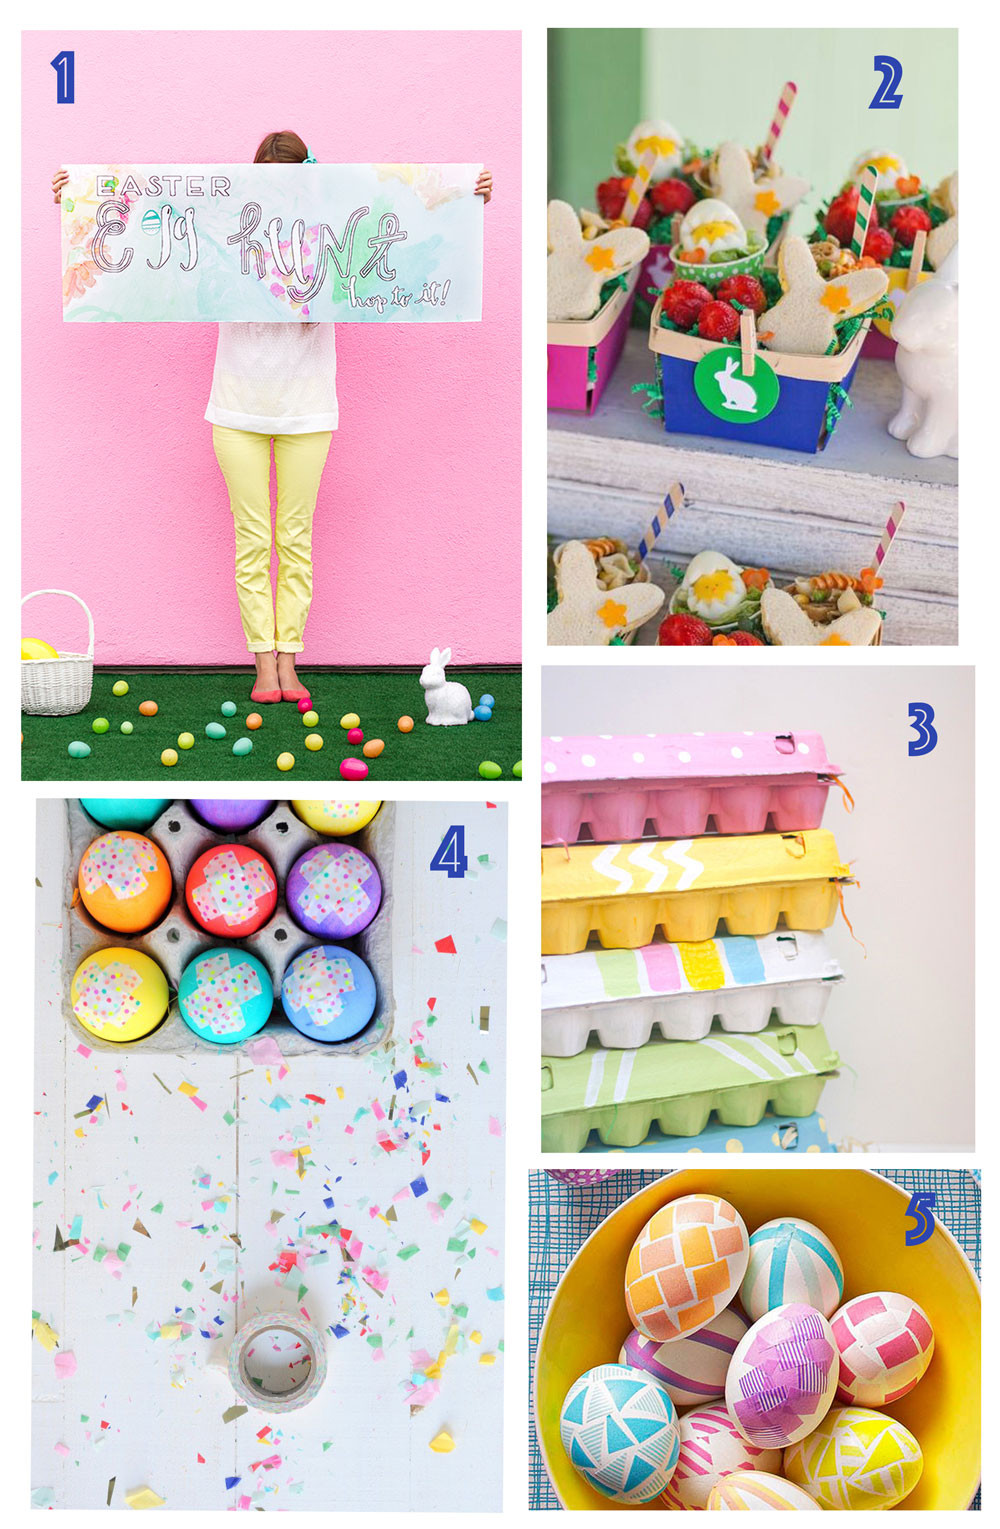 Fun Easter Egg Hunt Ideas
 TELL EASTER EGG HUNT IDEAS Tell Love and Party